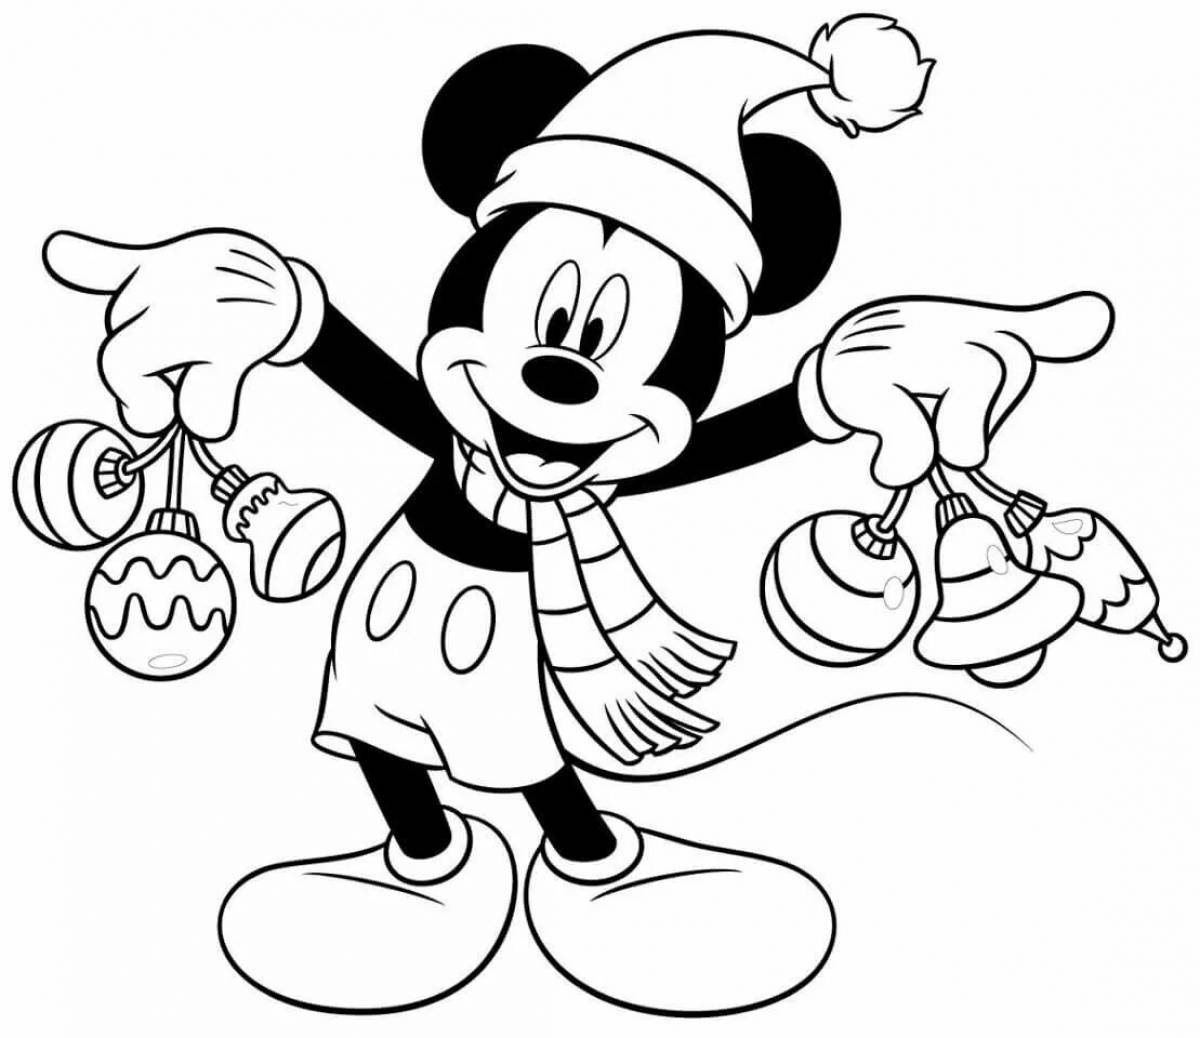 Mickey mouse new year #3